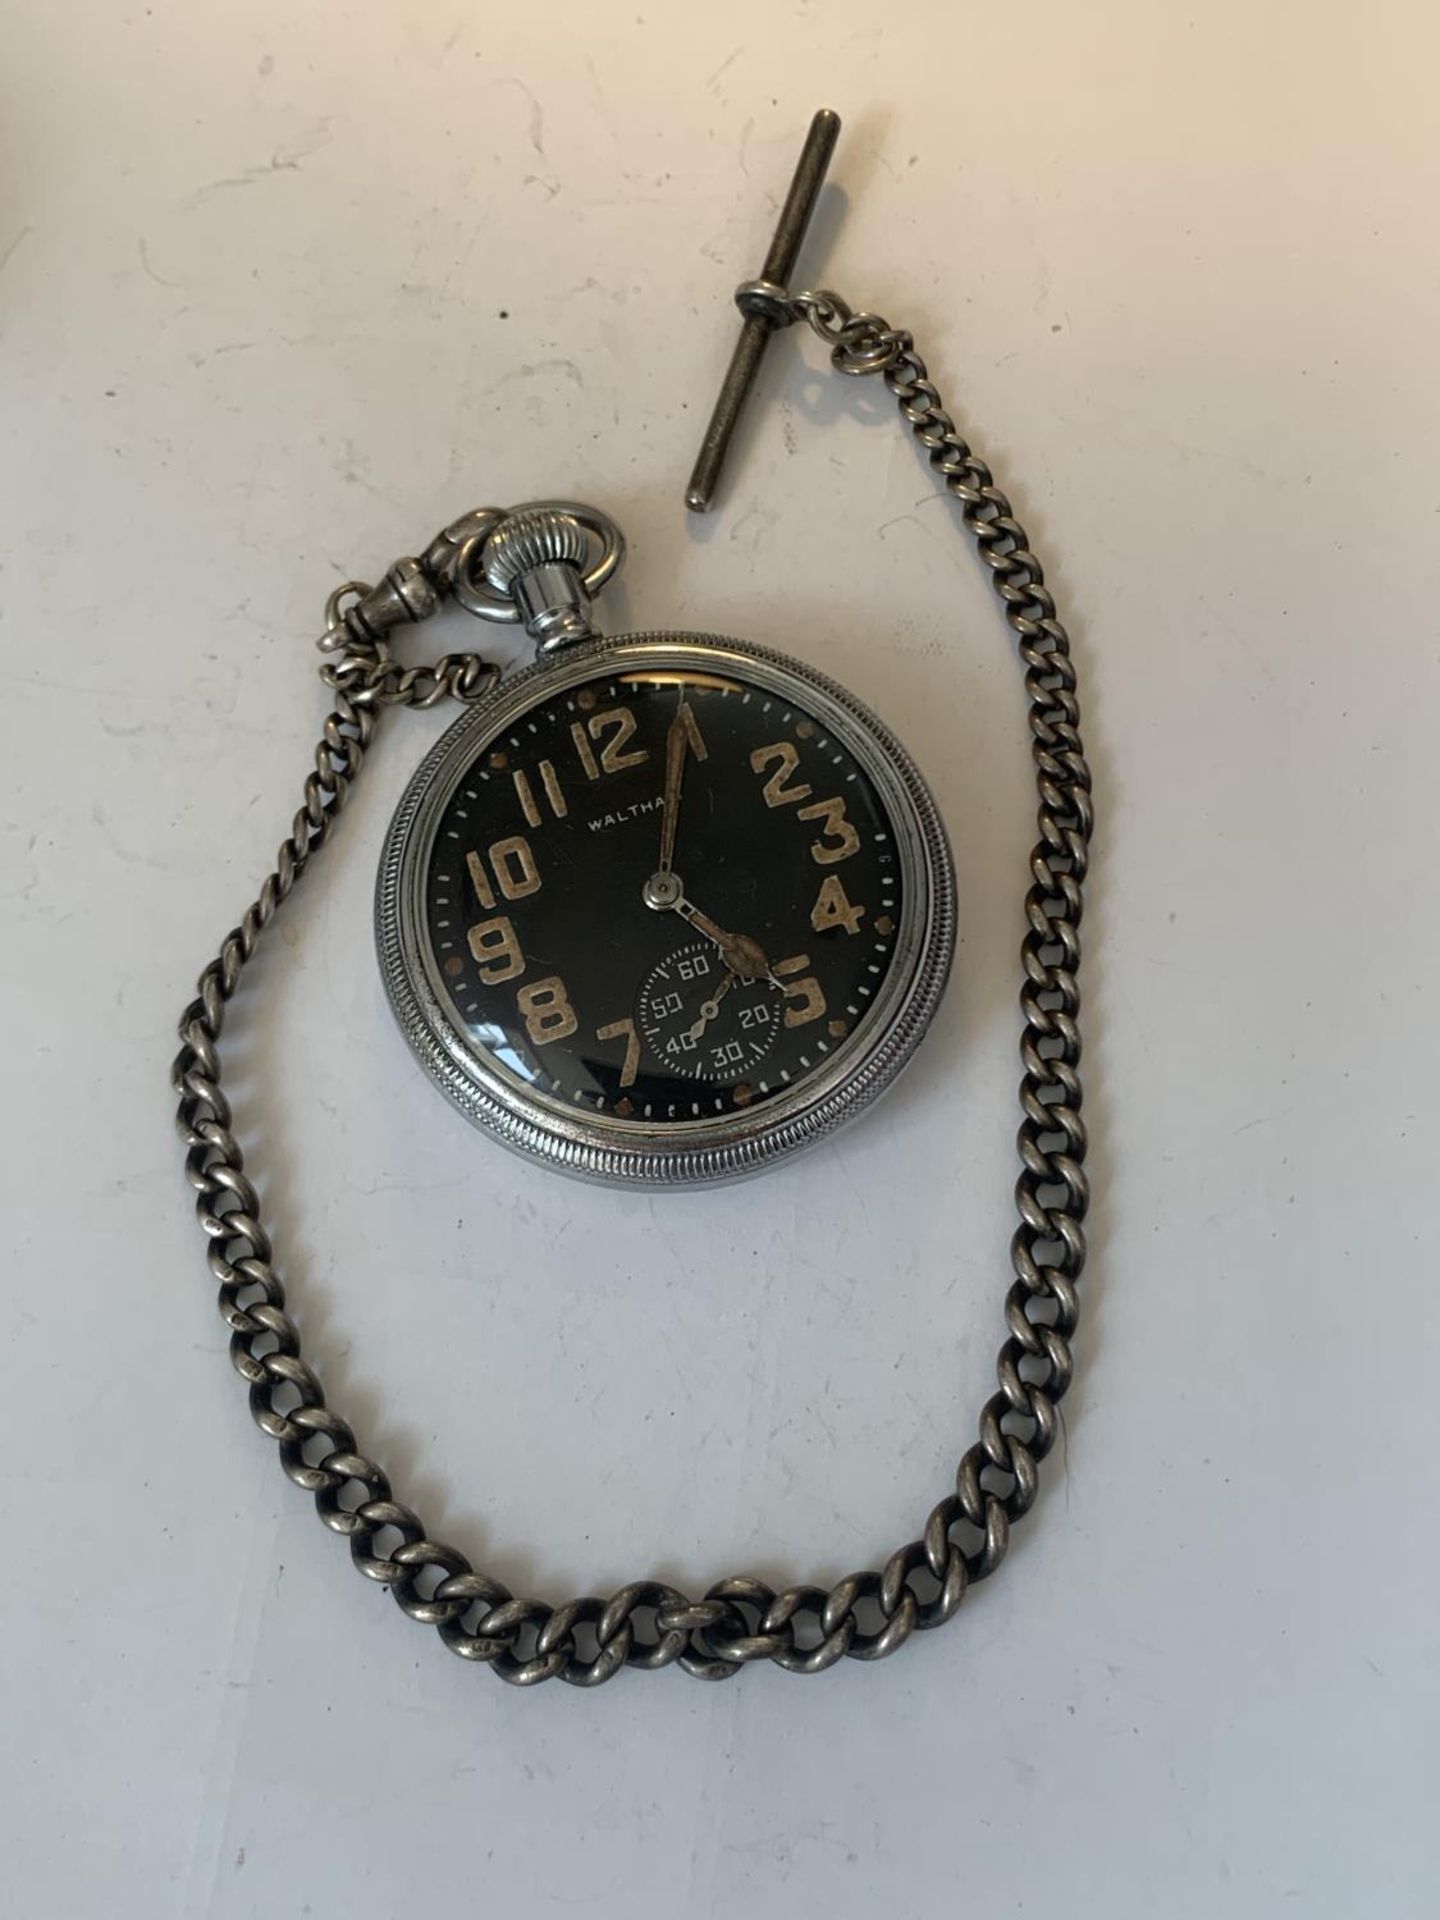 A MILITARY WALTHAM POCKET WATCH ON A MARKED SILVER T BAR CHAIN